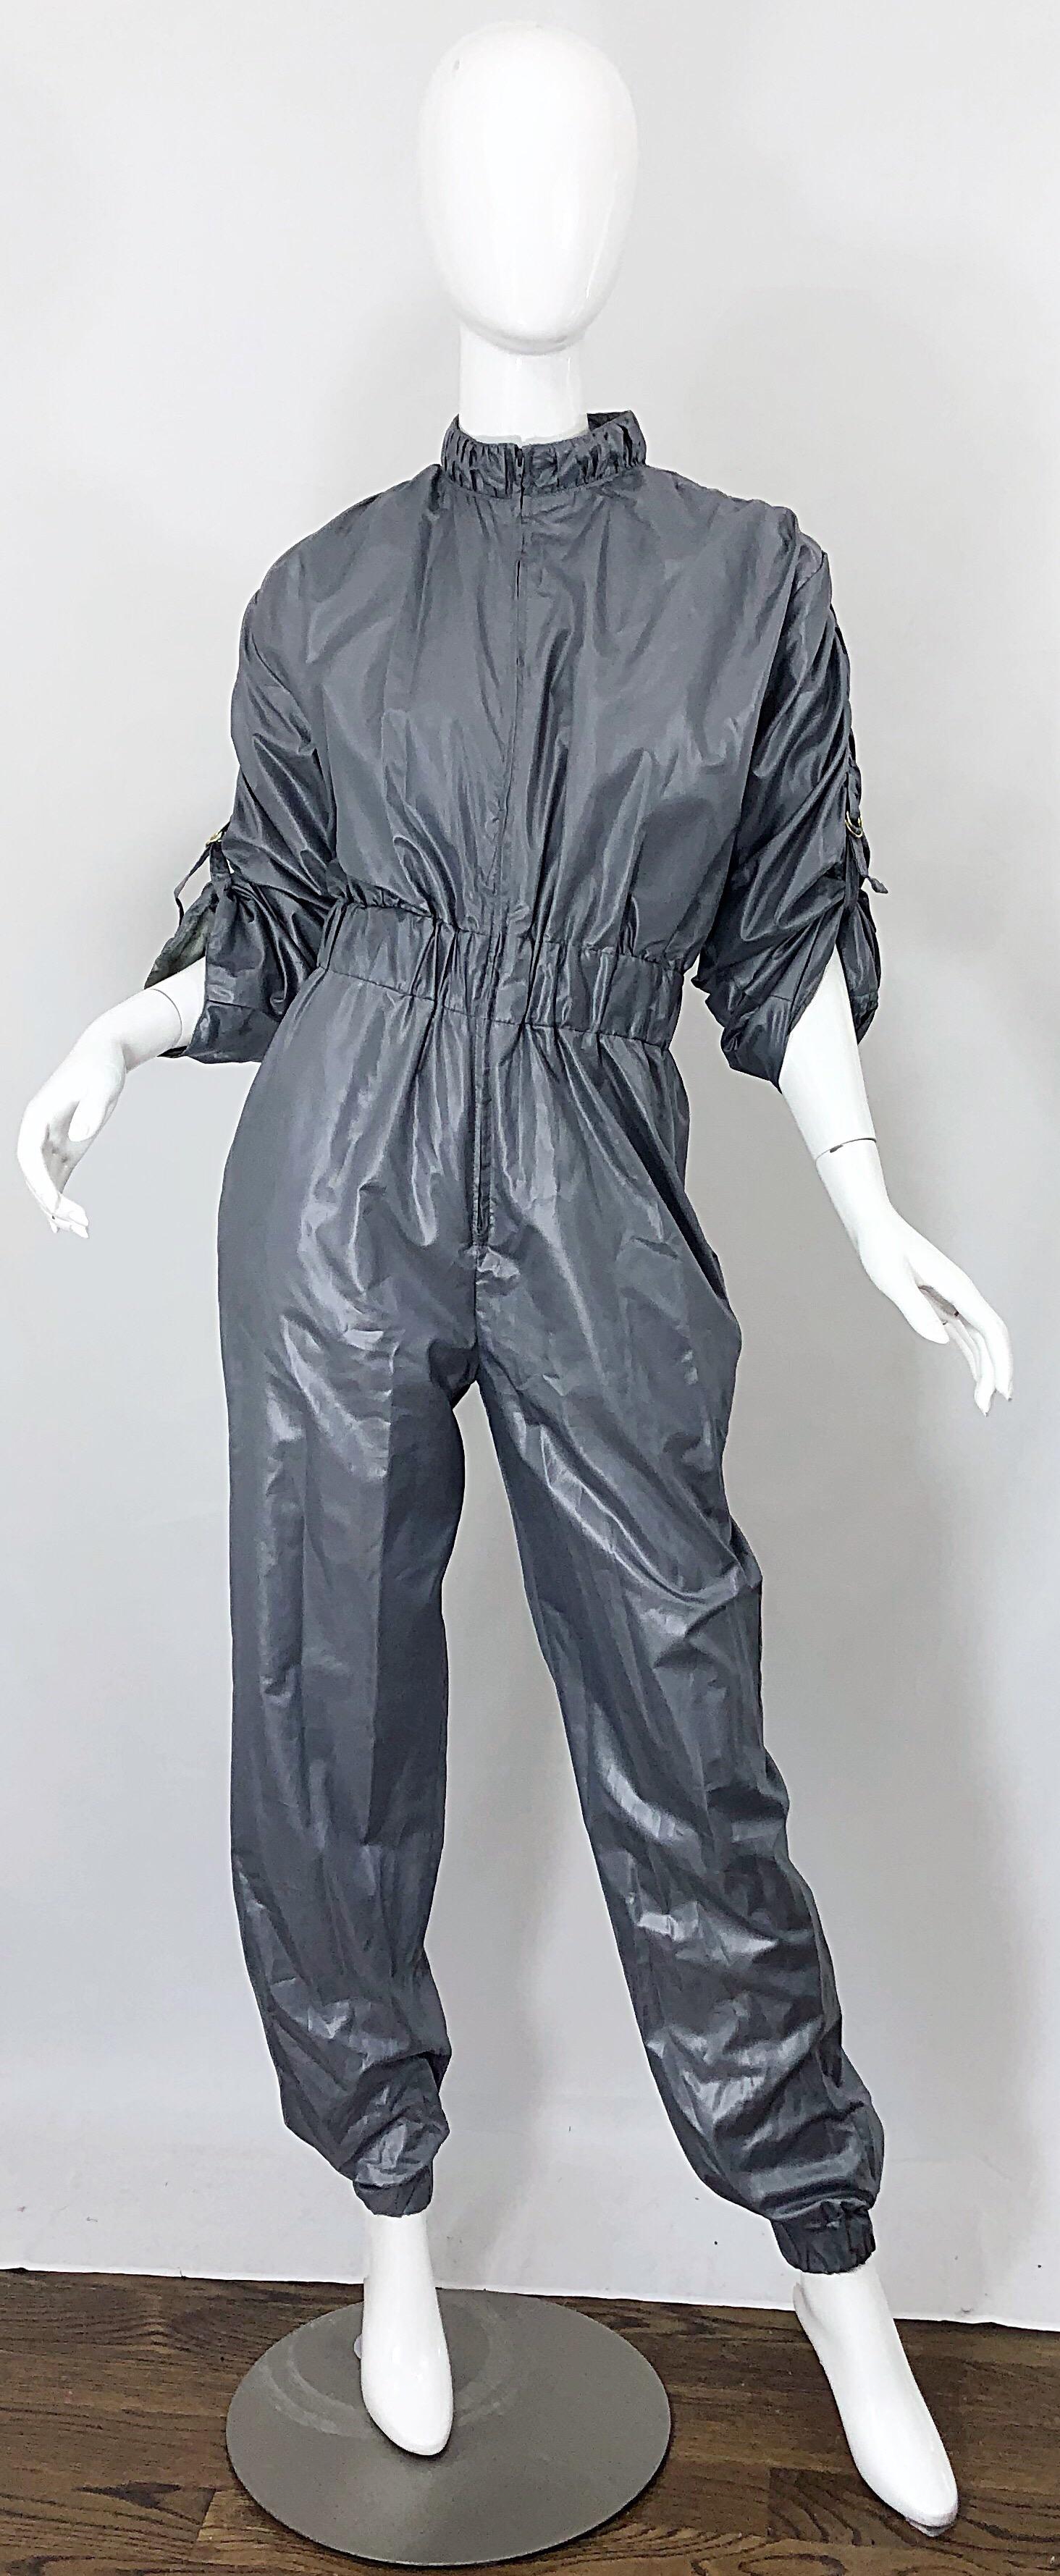 Avant Garde ANTONIO RUSPOLI, by JOY STEVENS shark gray one piece jumpsuit! Features a zipper up the front, which can be worn fully zipped, or left open to reveal cleavage. Adjustable ruched sleeves can be adjusted with attached buckle. Elastic